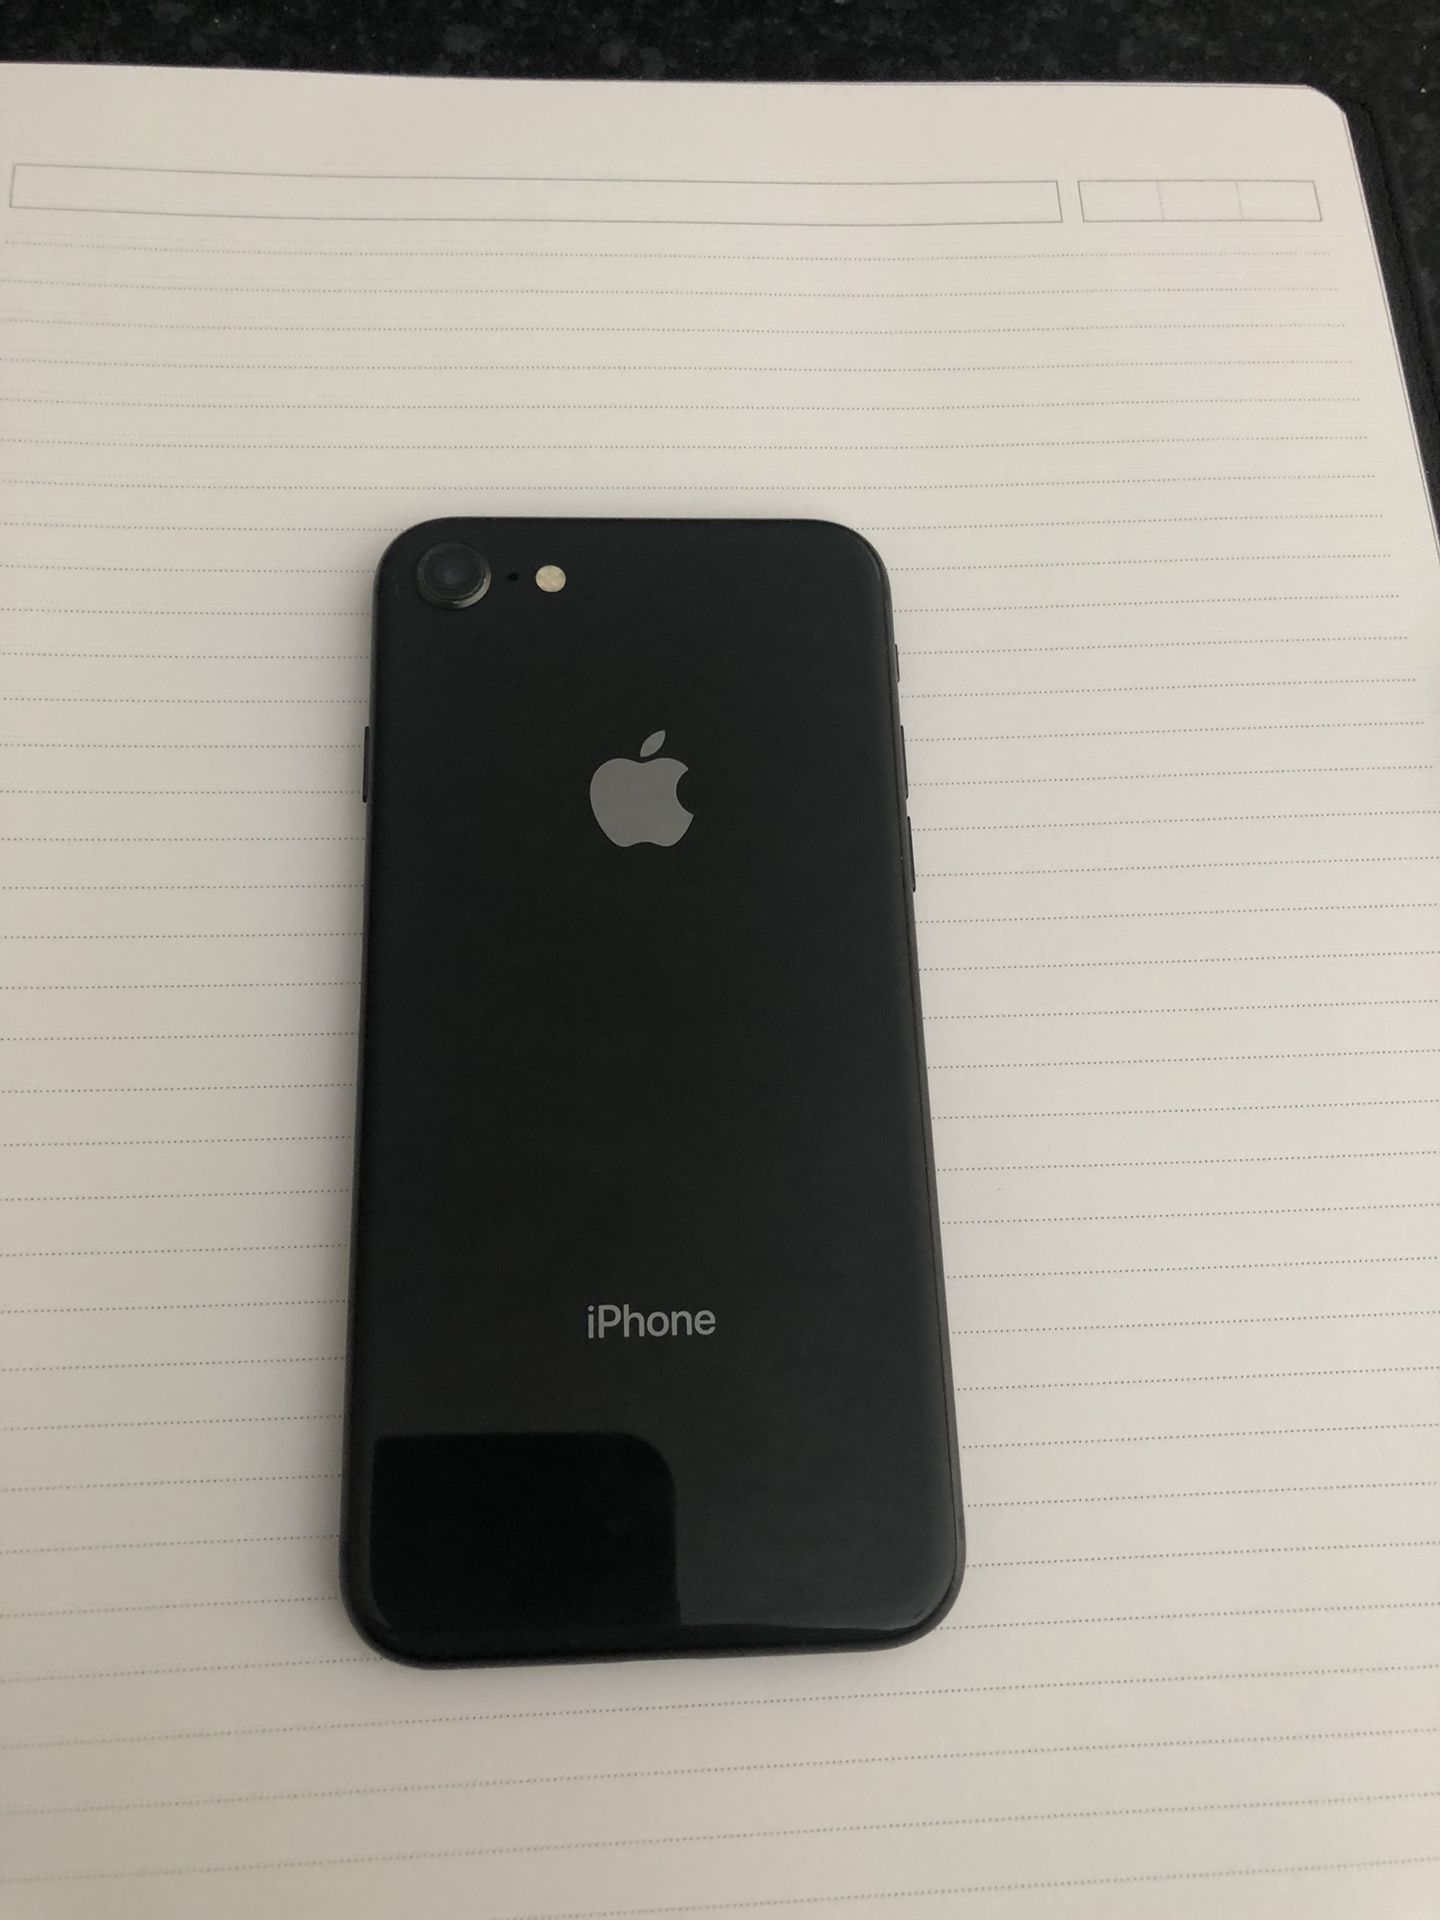 IPhone 8 Model A1863 flawless condition